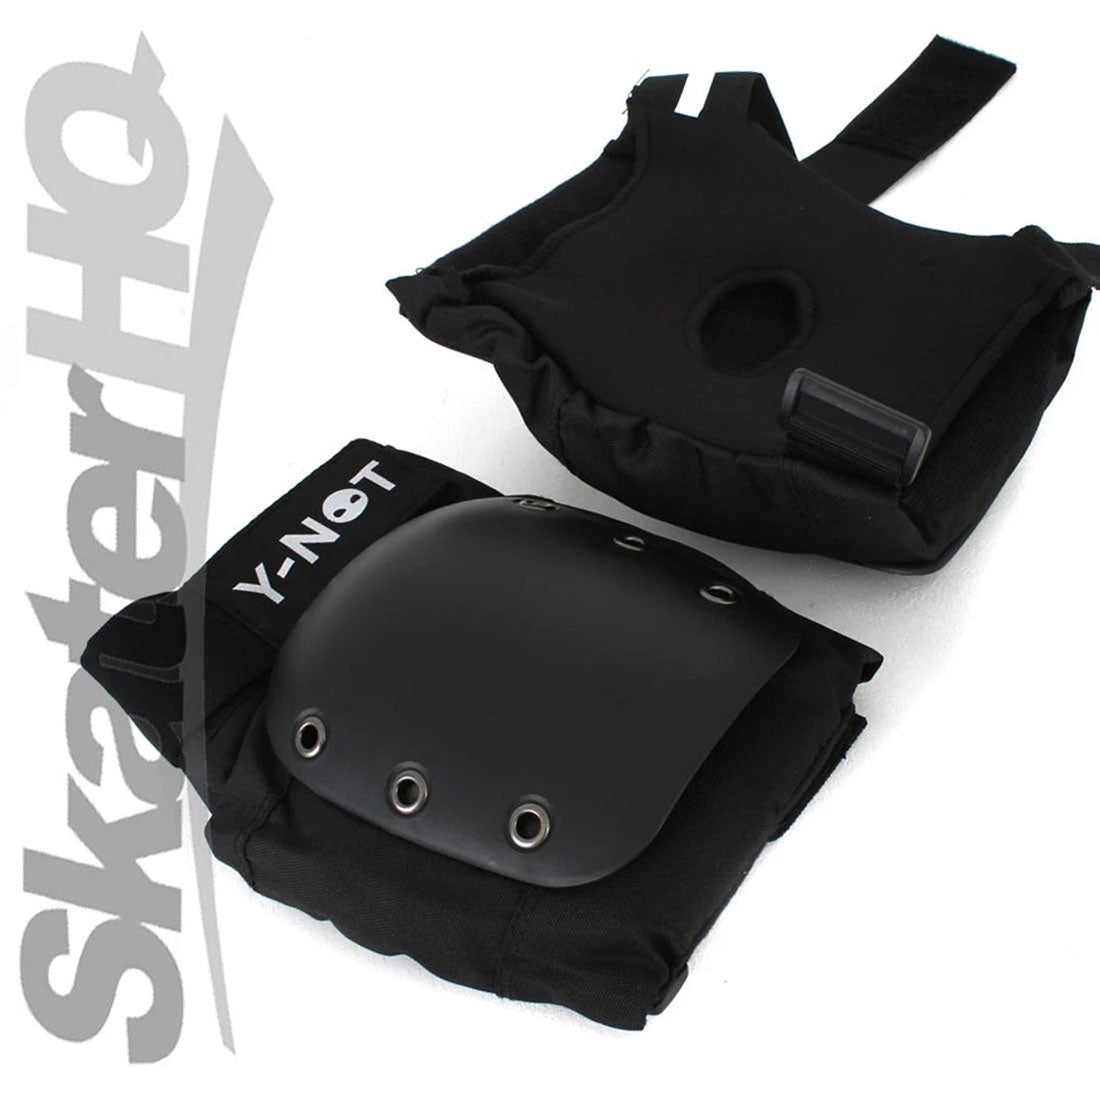 Y-Not Protective Knee Pad - Small Protective Gear